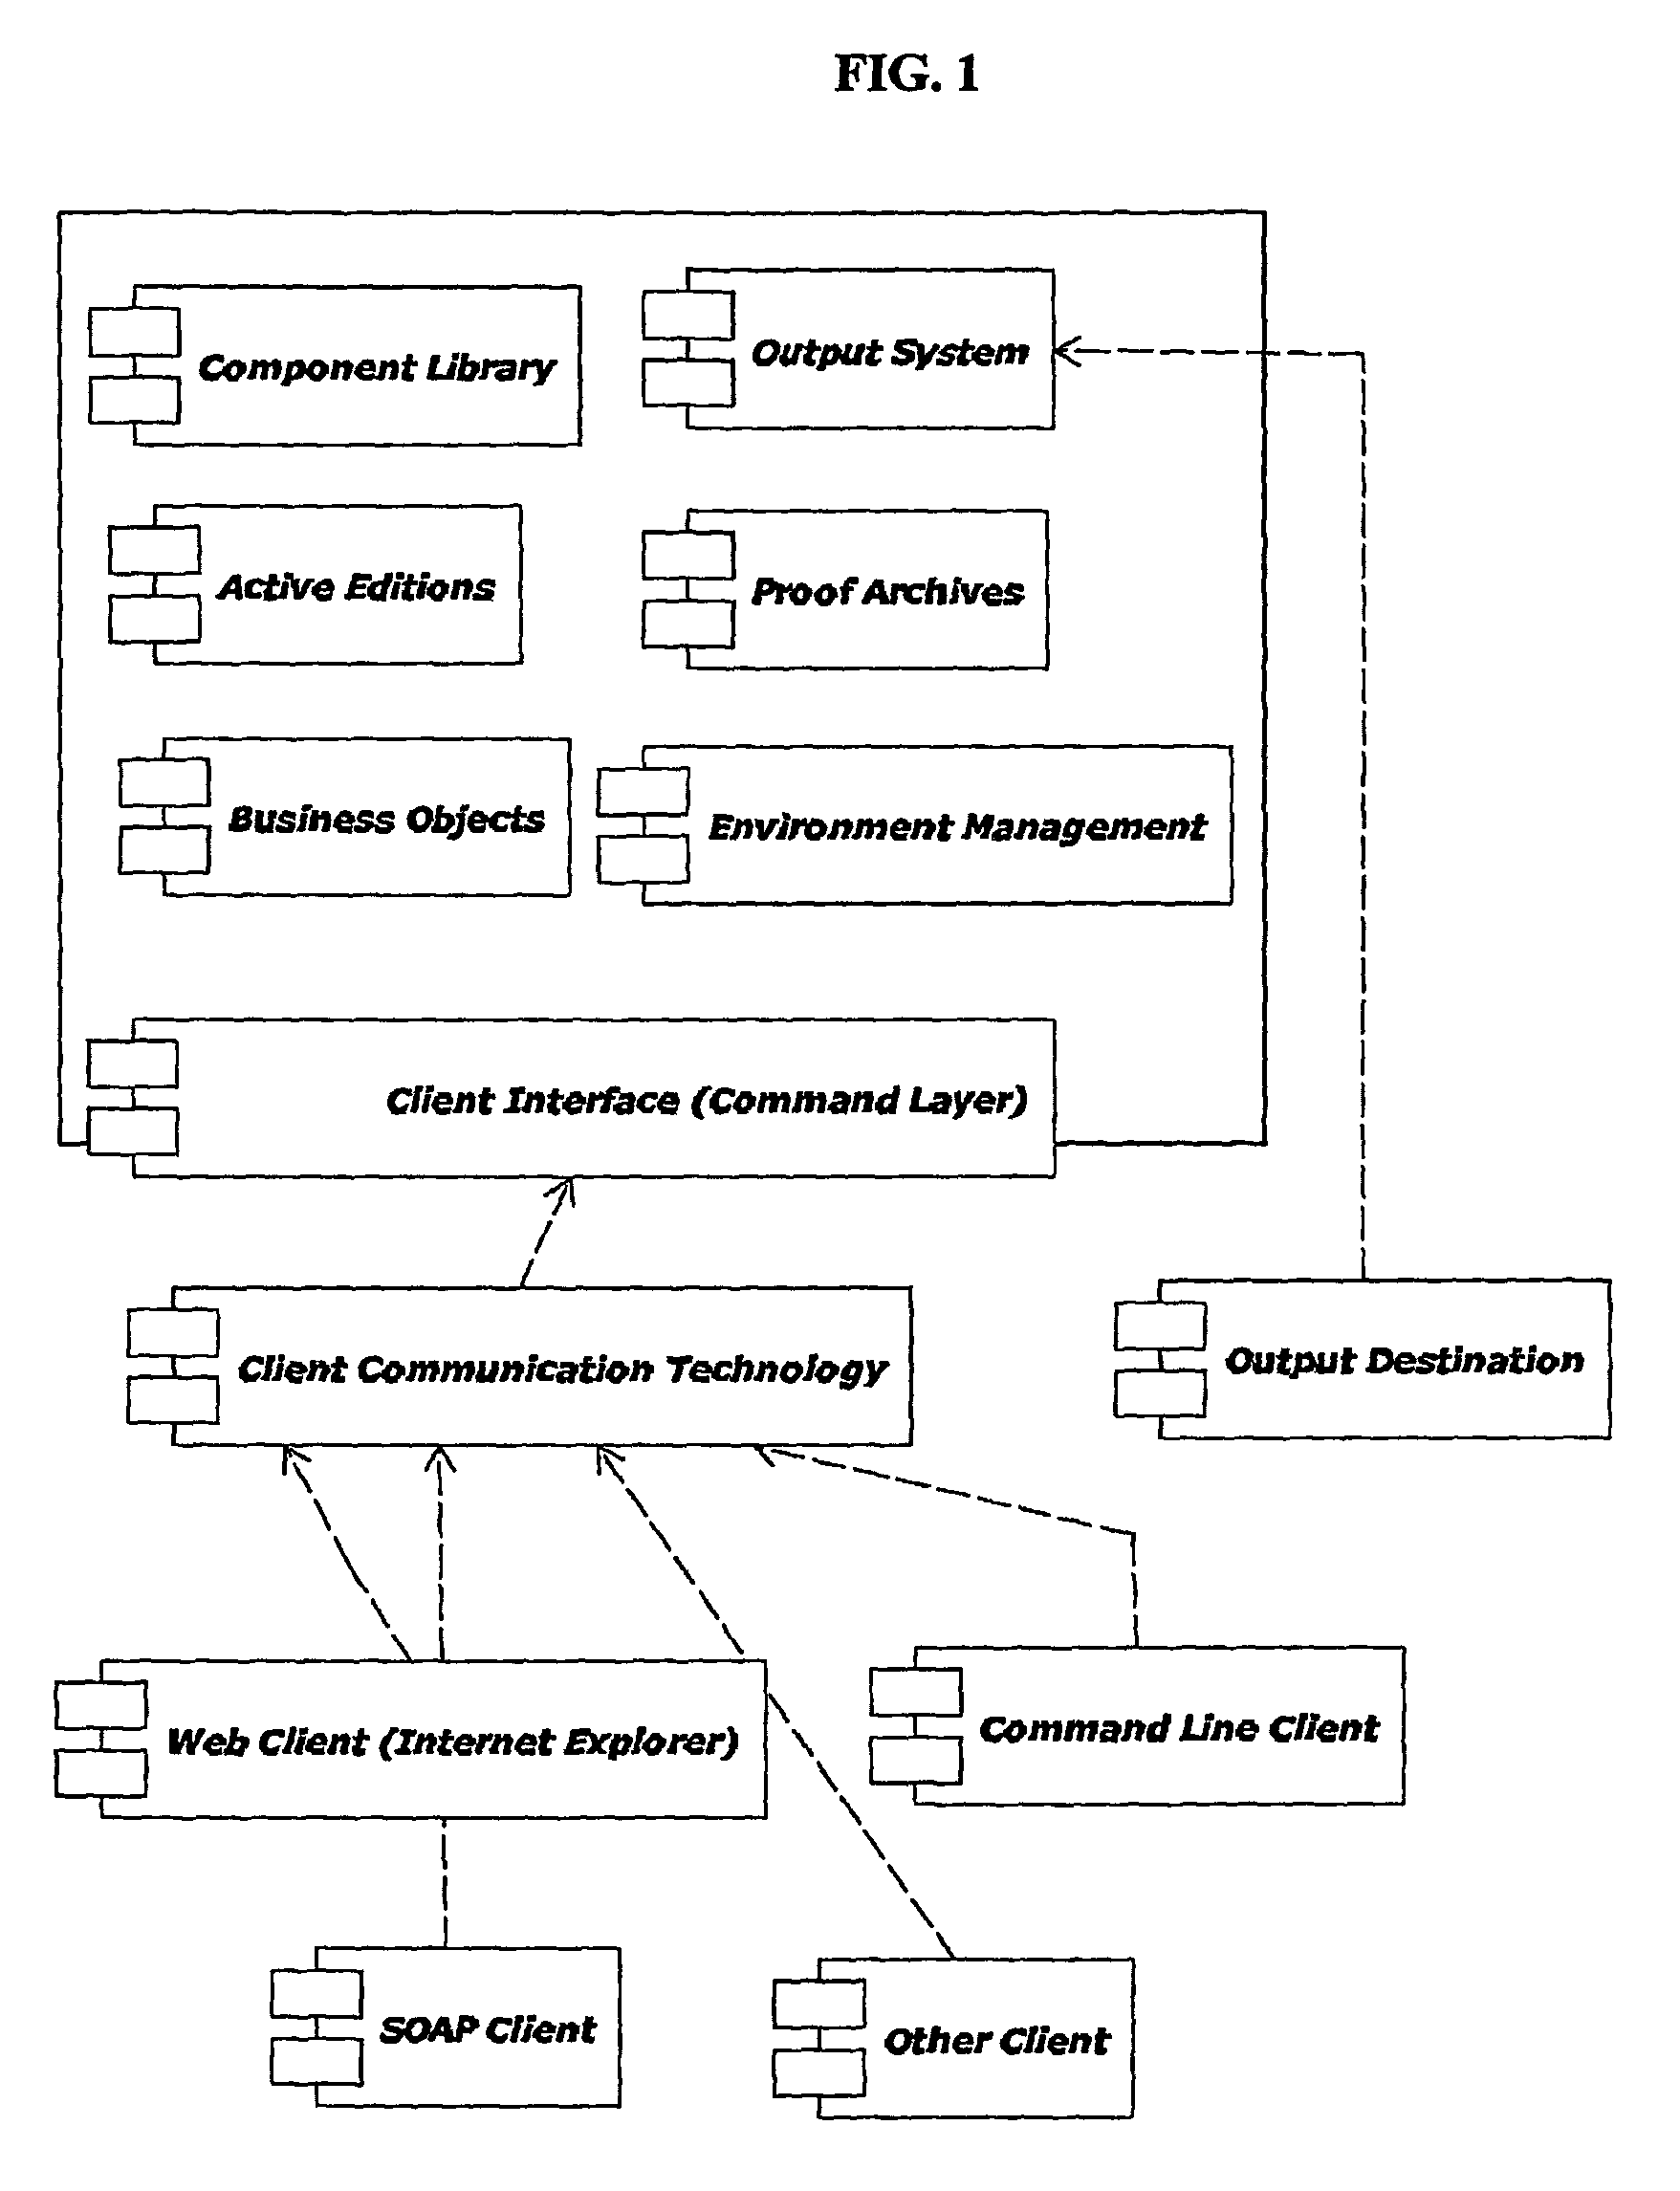 Automated publishing system that facilitates collaborative editing and accountability through virtual document architecture